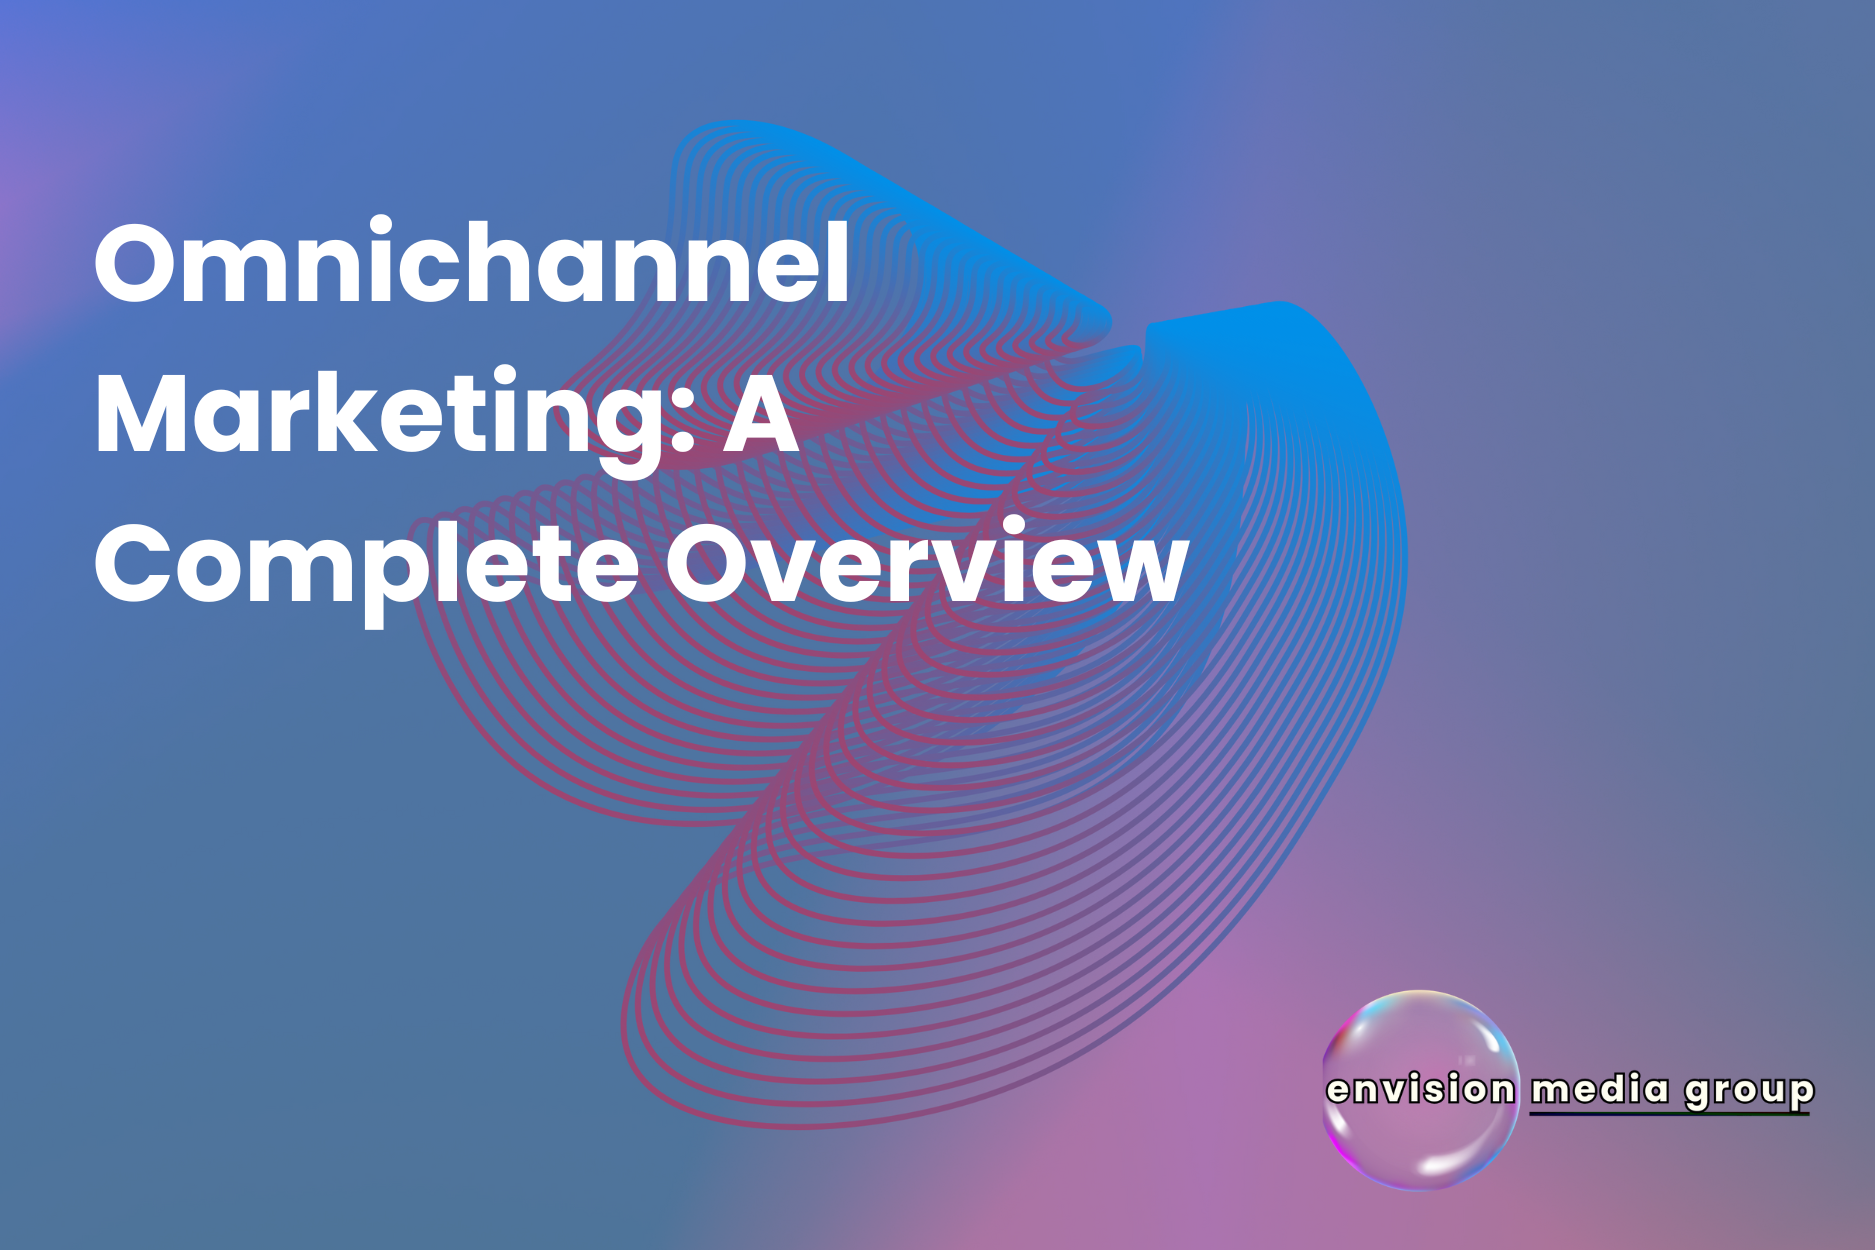 Omnichannel marketing approach integrating B2B strategies with automation tools.